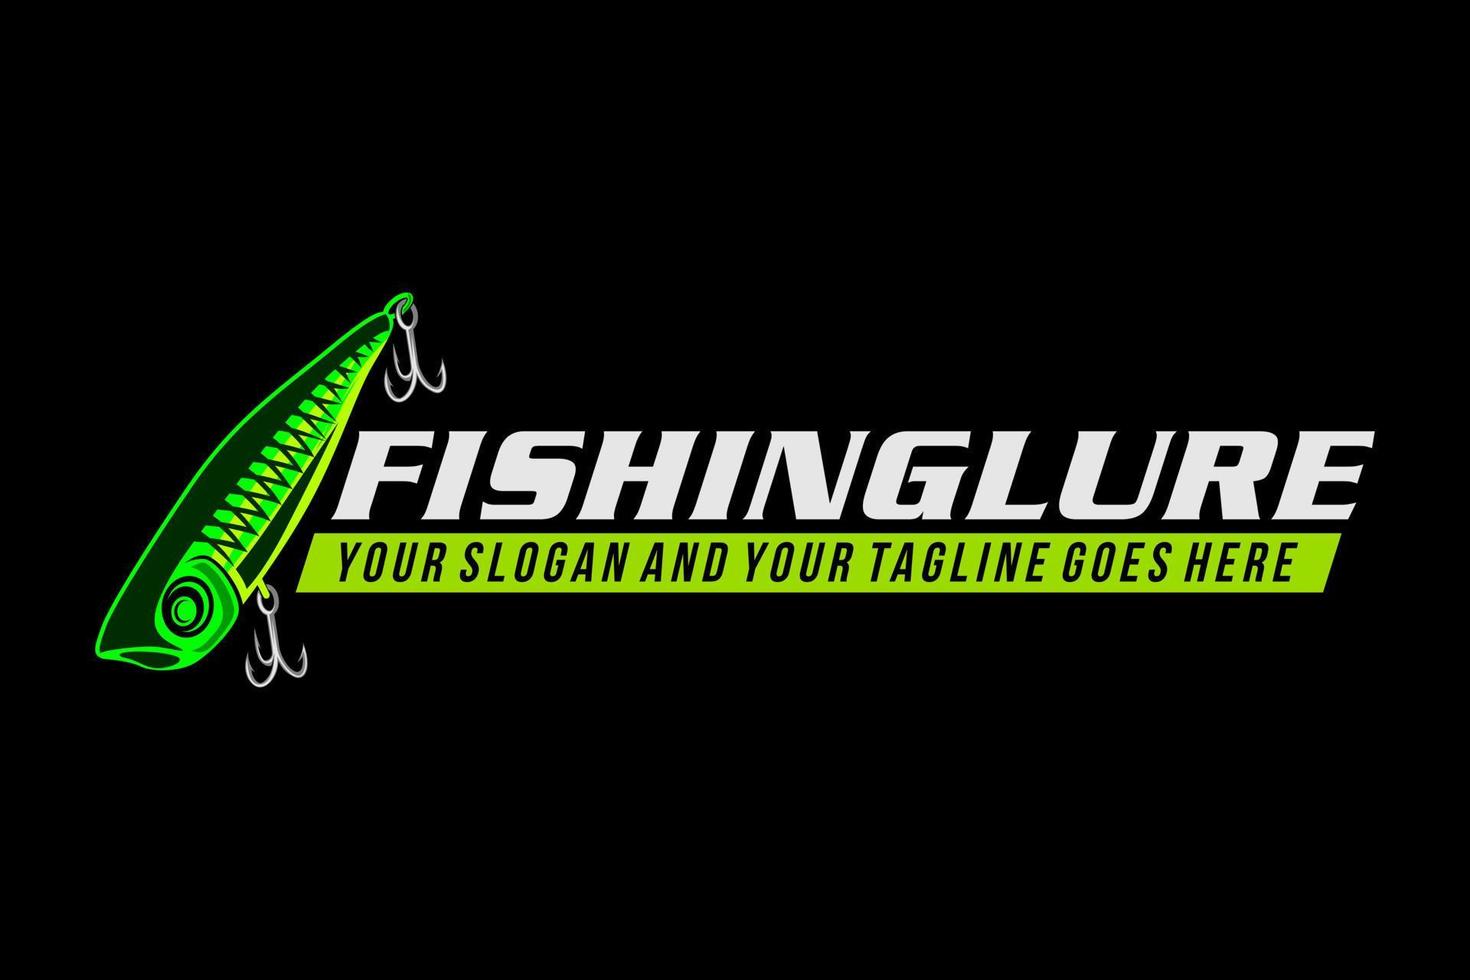 fishing lures fish logo, design template vector illustration. great to use as your fishing company logo